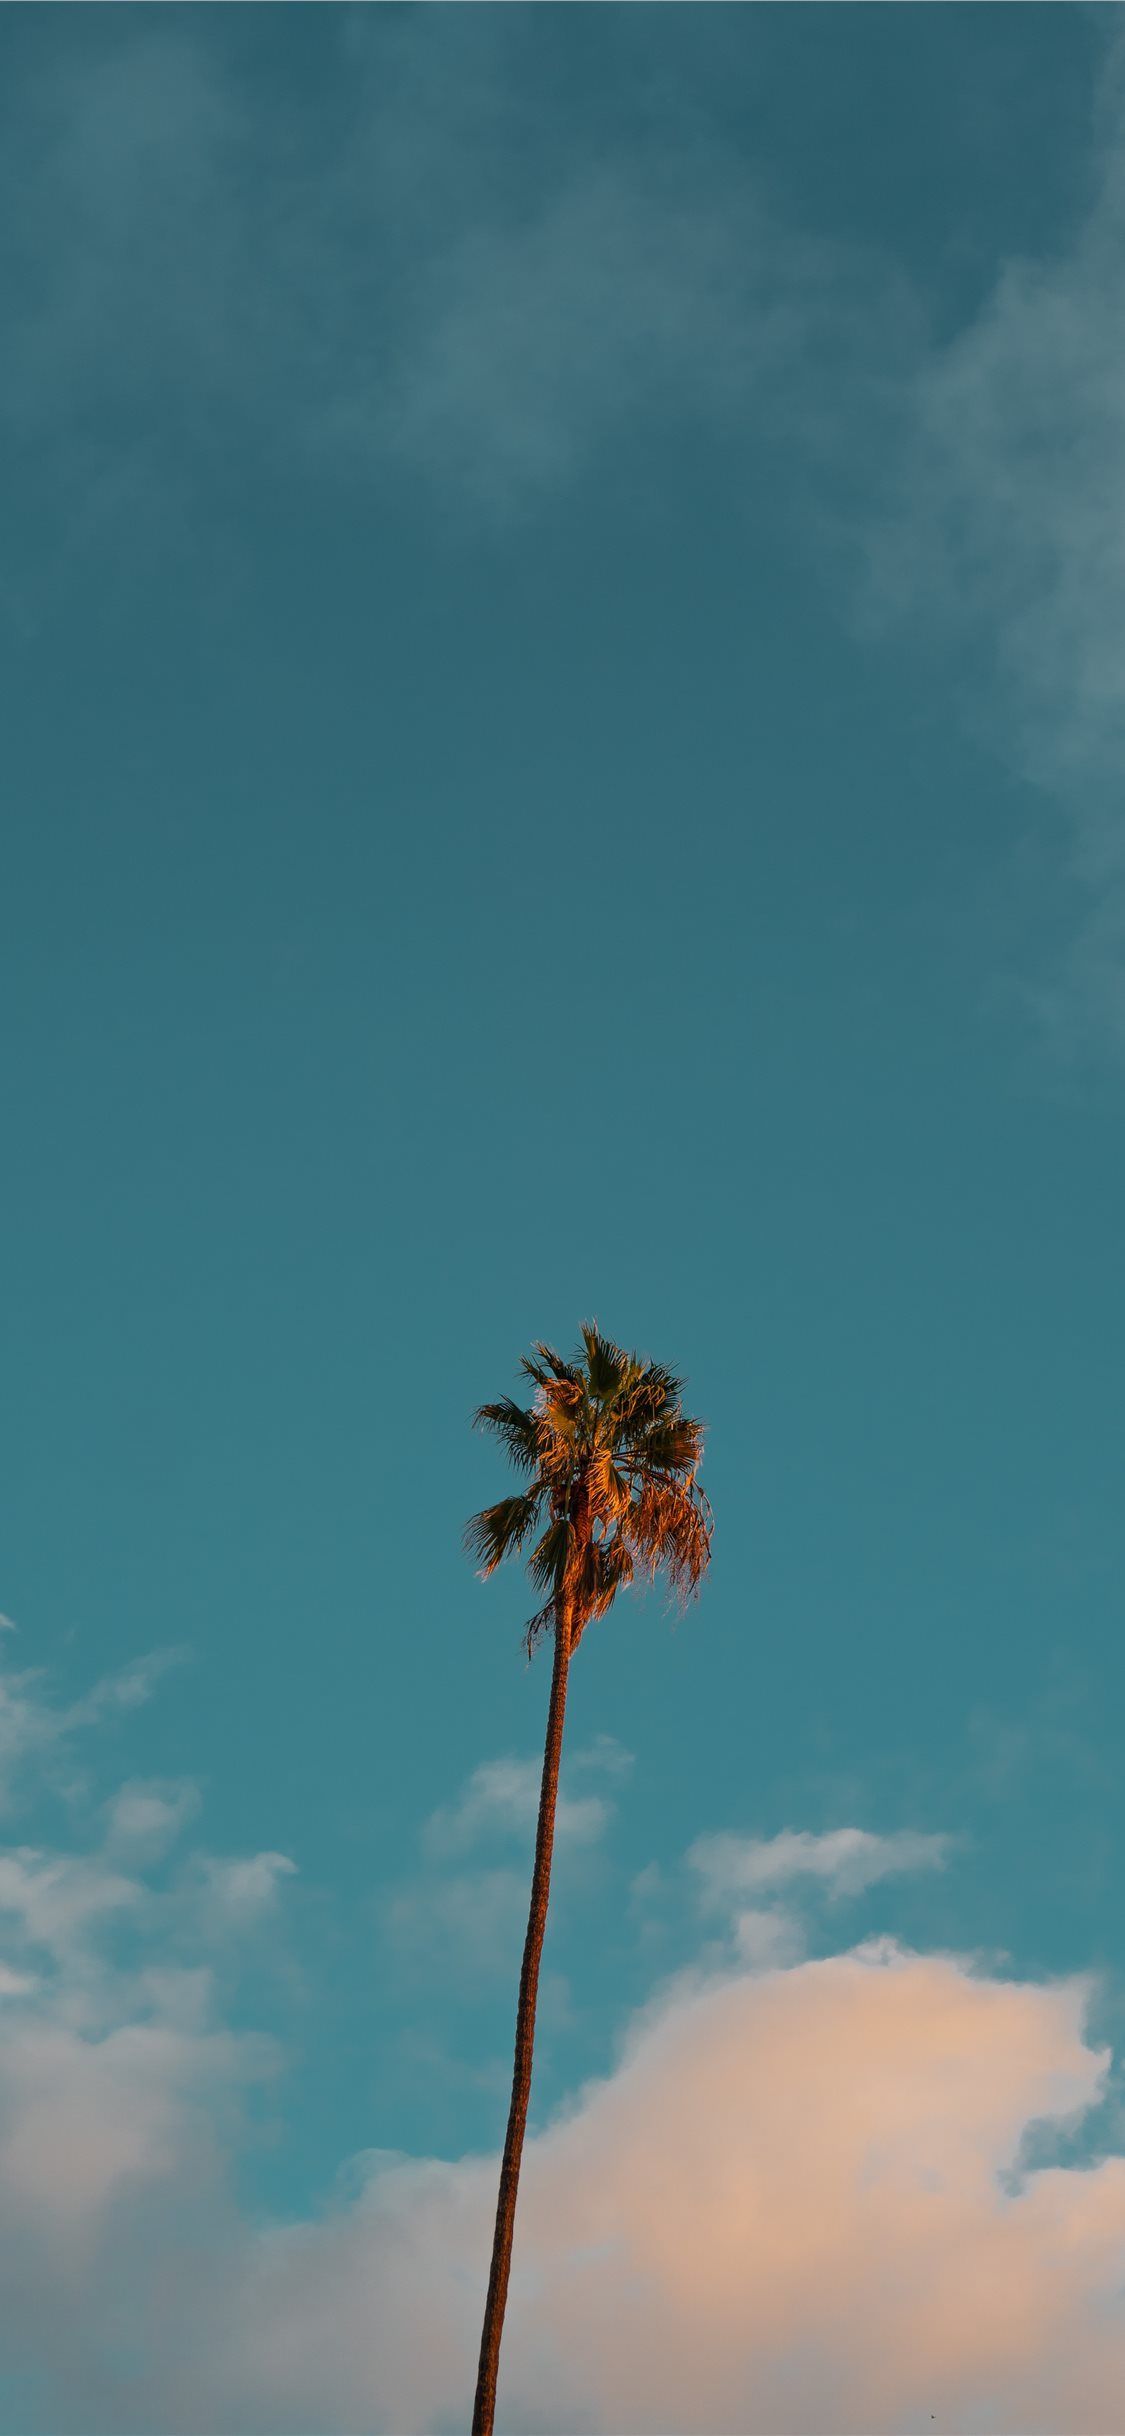 Palm Tree iPhone Wallpaper Free Palm Tree iPhone Background